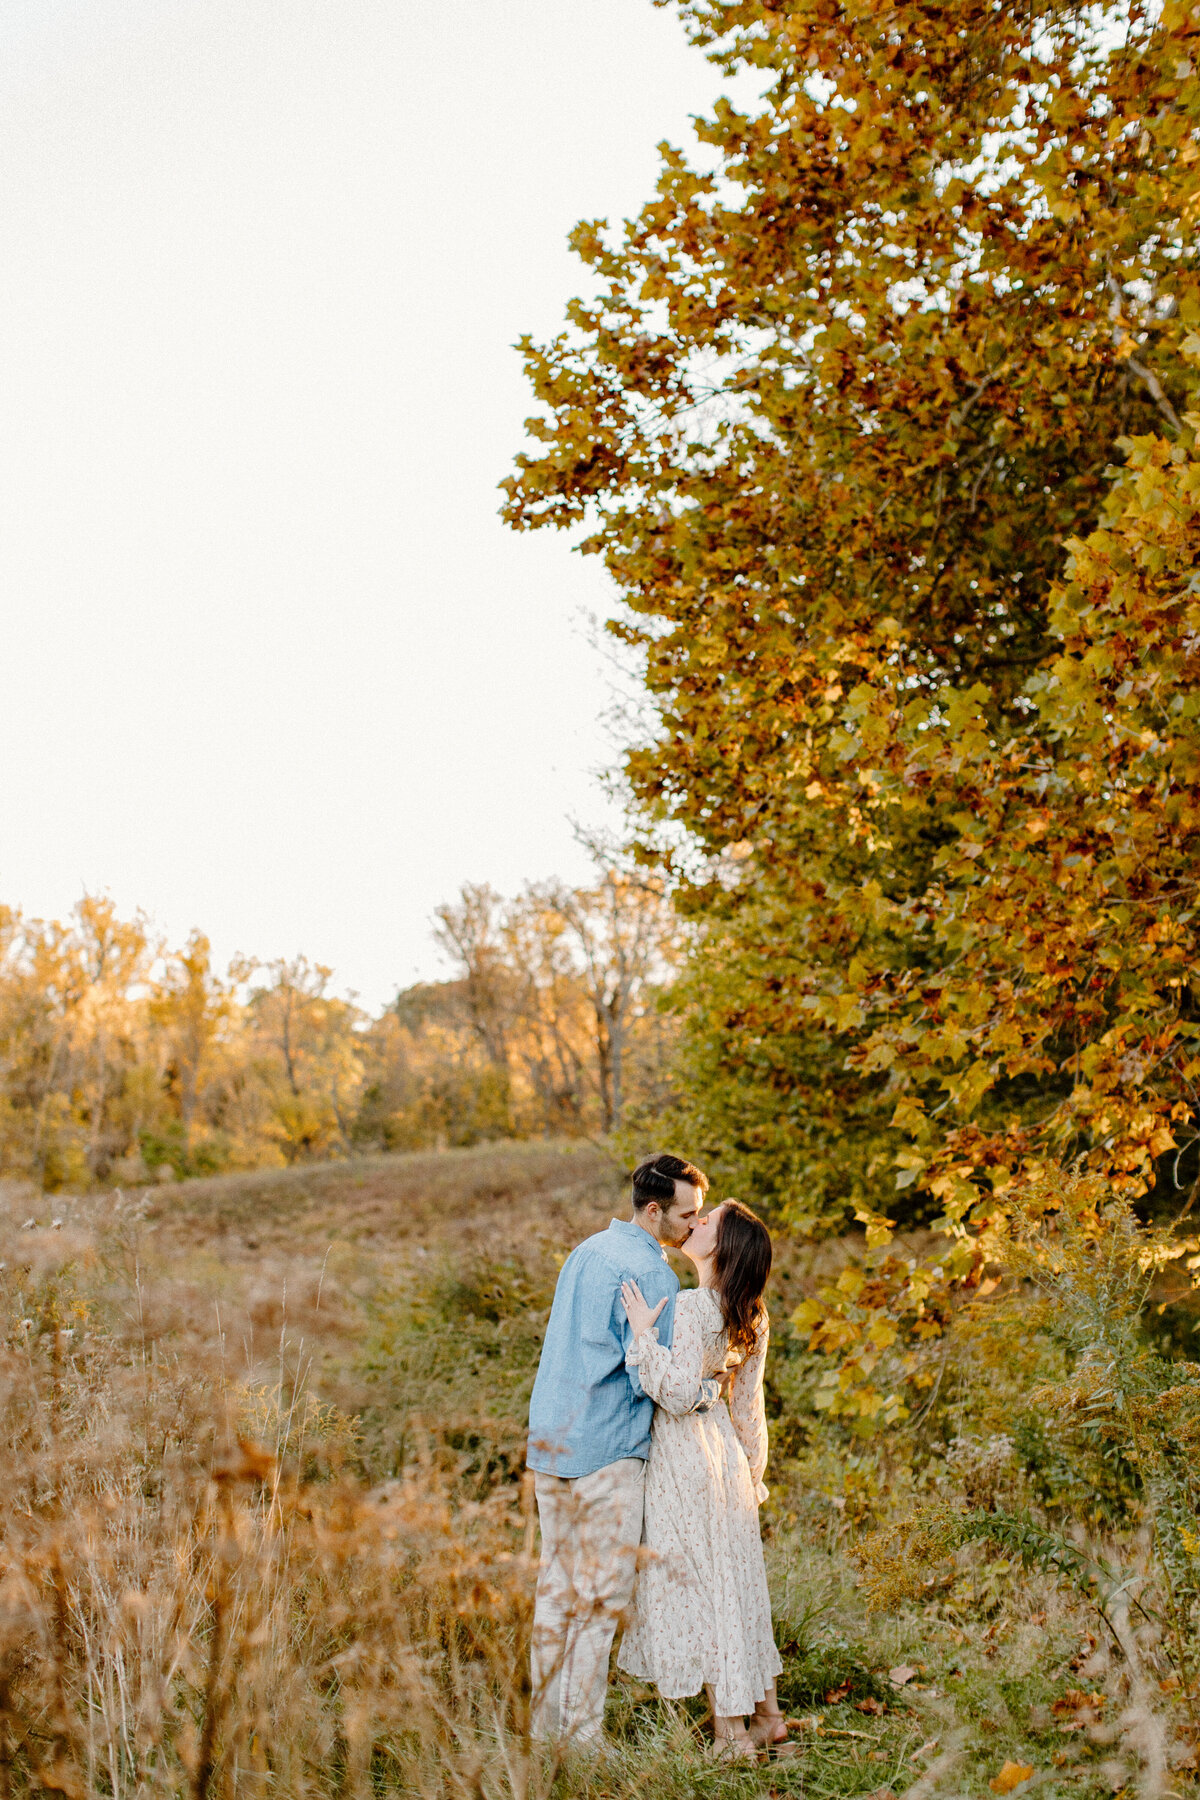 Taylor + Dylan Engagements (188 of 288)